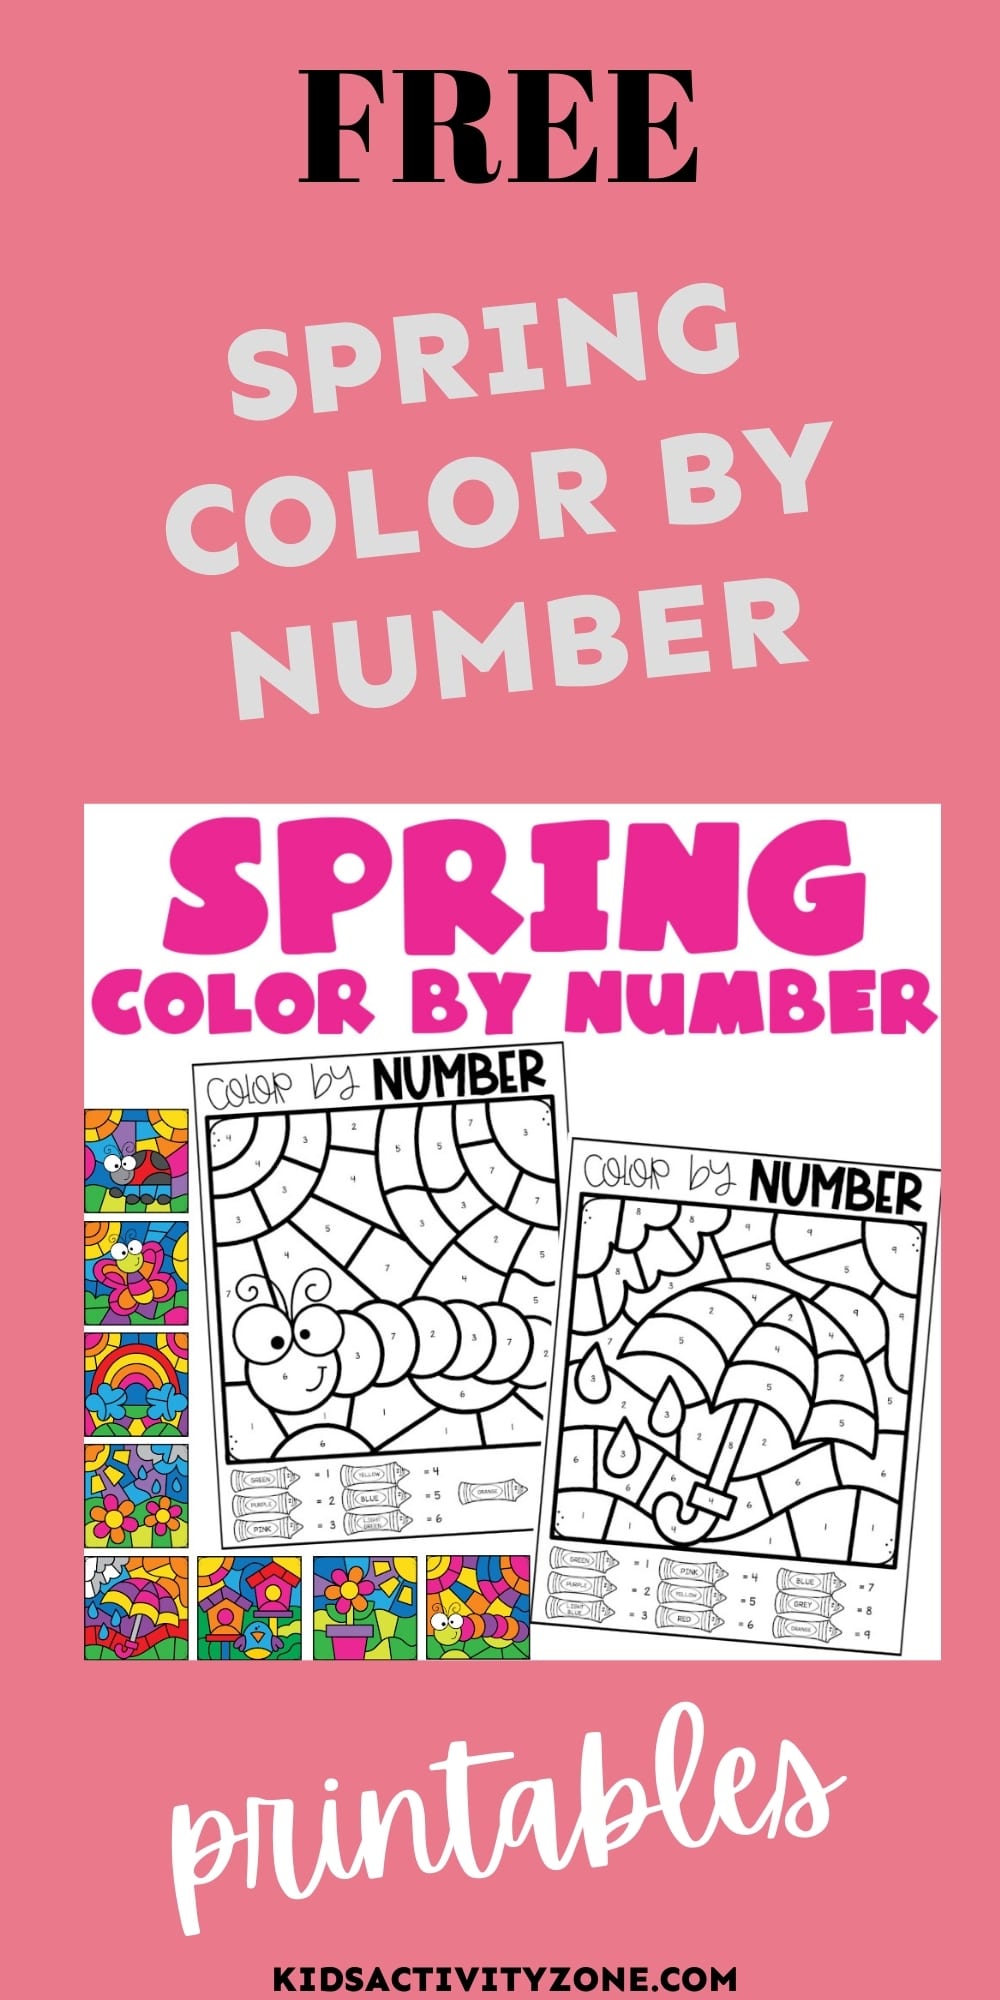 Get your kids excited for spring with these educational and fun spring color by number printables. Practice counting, number recognition, and fine motor skills while creating beautiful spring-themed pictures. Grab these free coloring pages today!